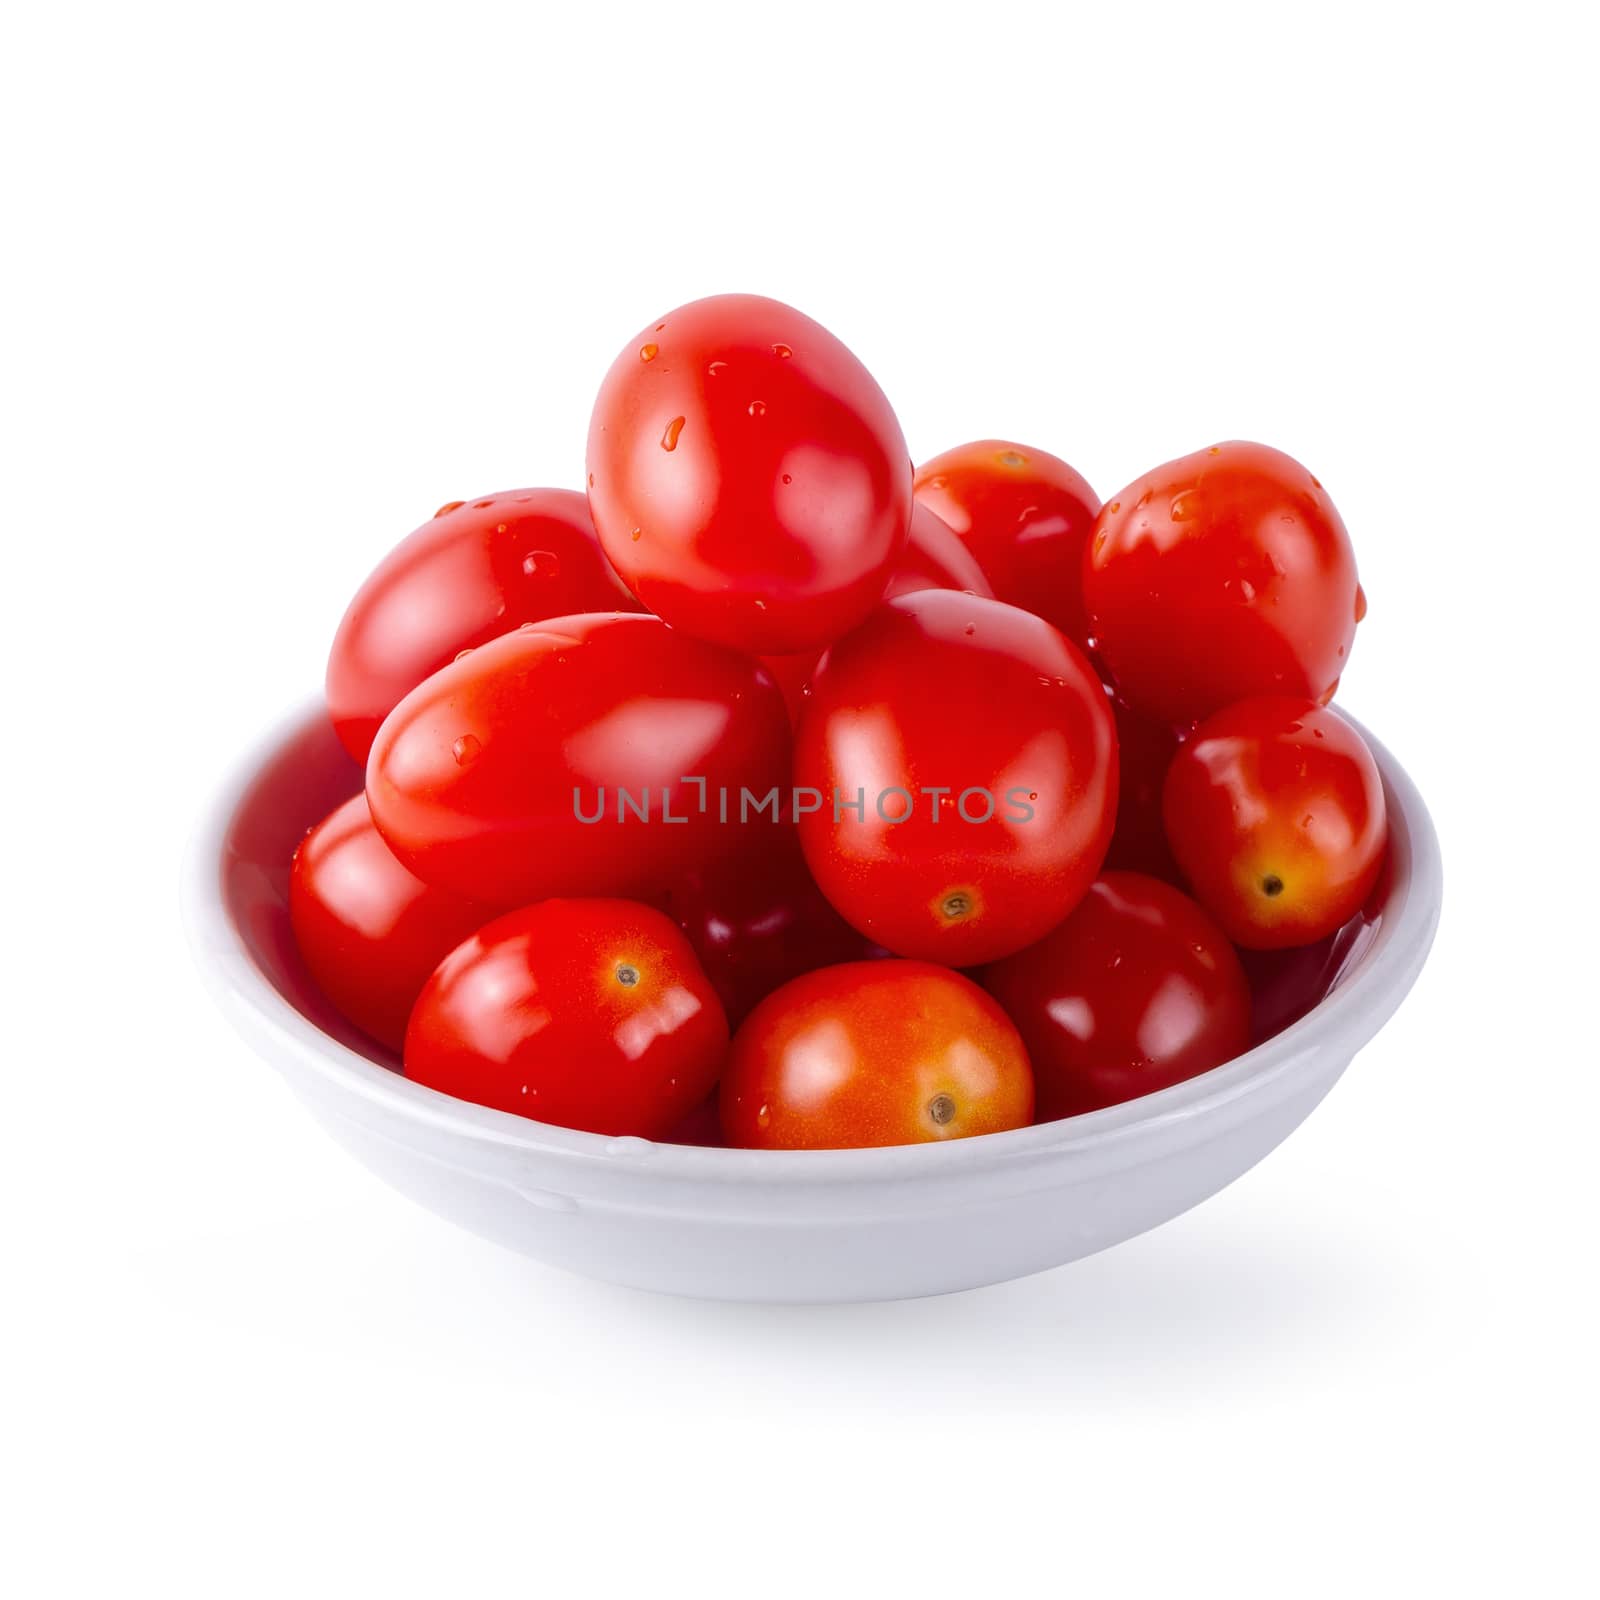 Red ripe tomatoes isolated over white background by kaiskynet